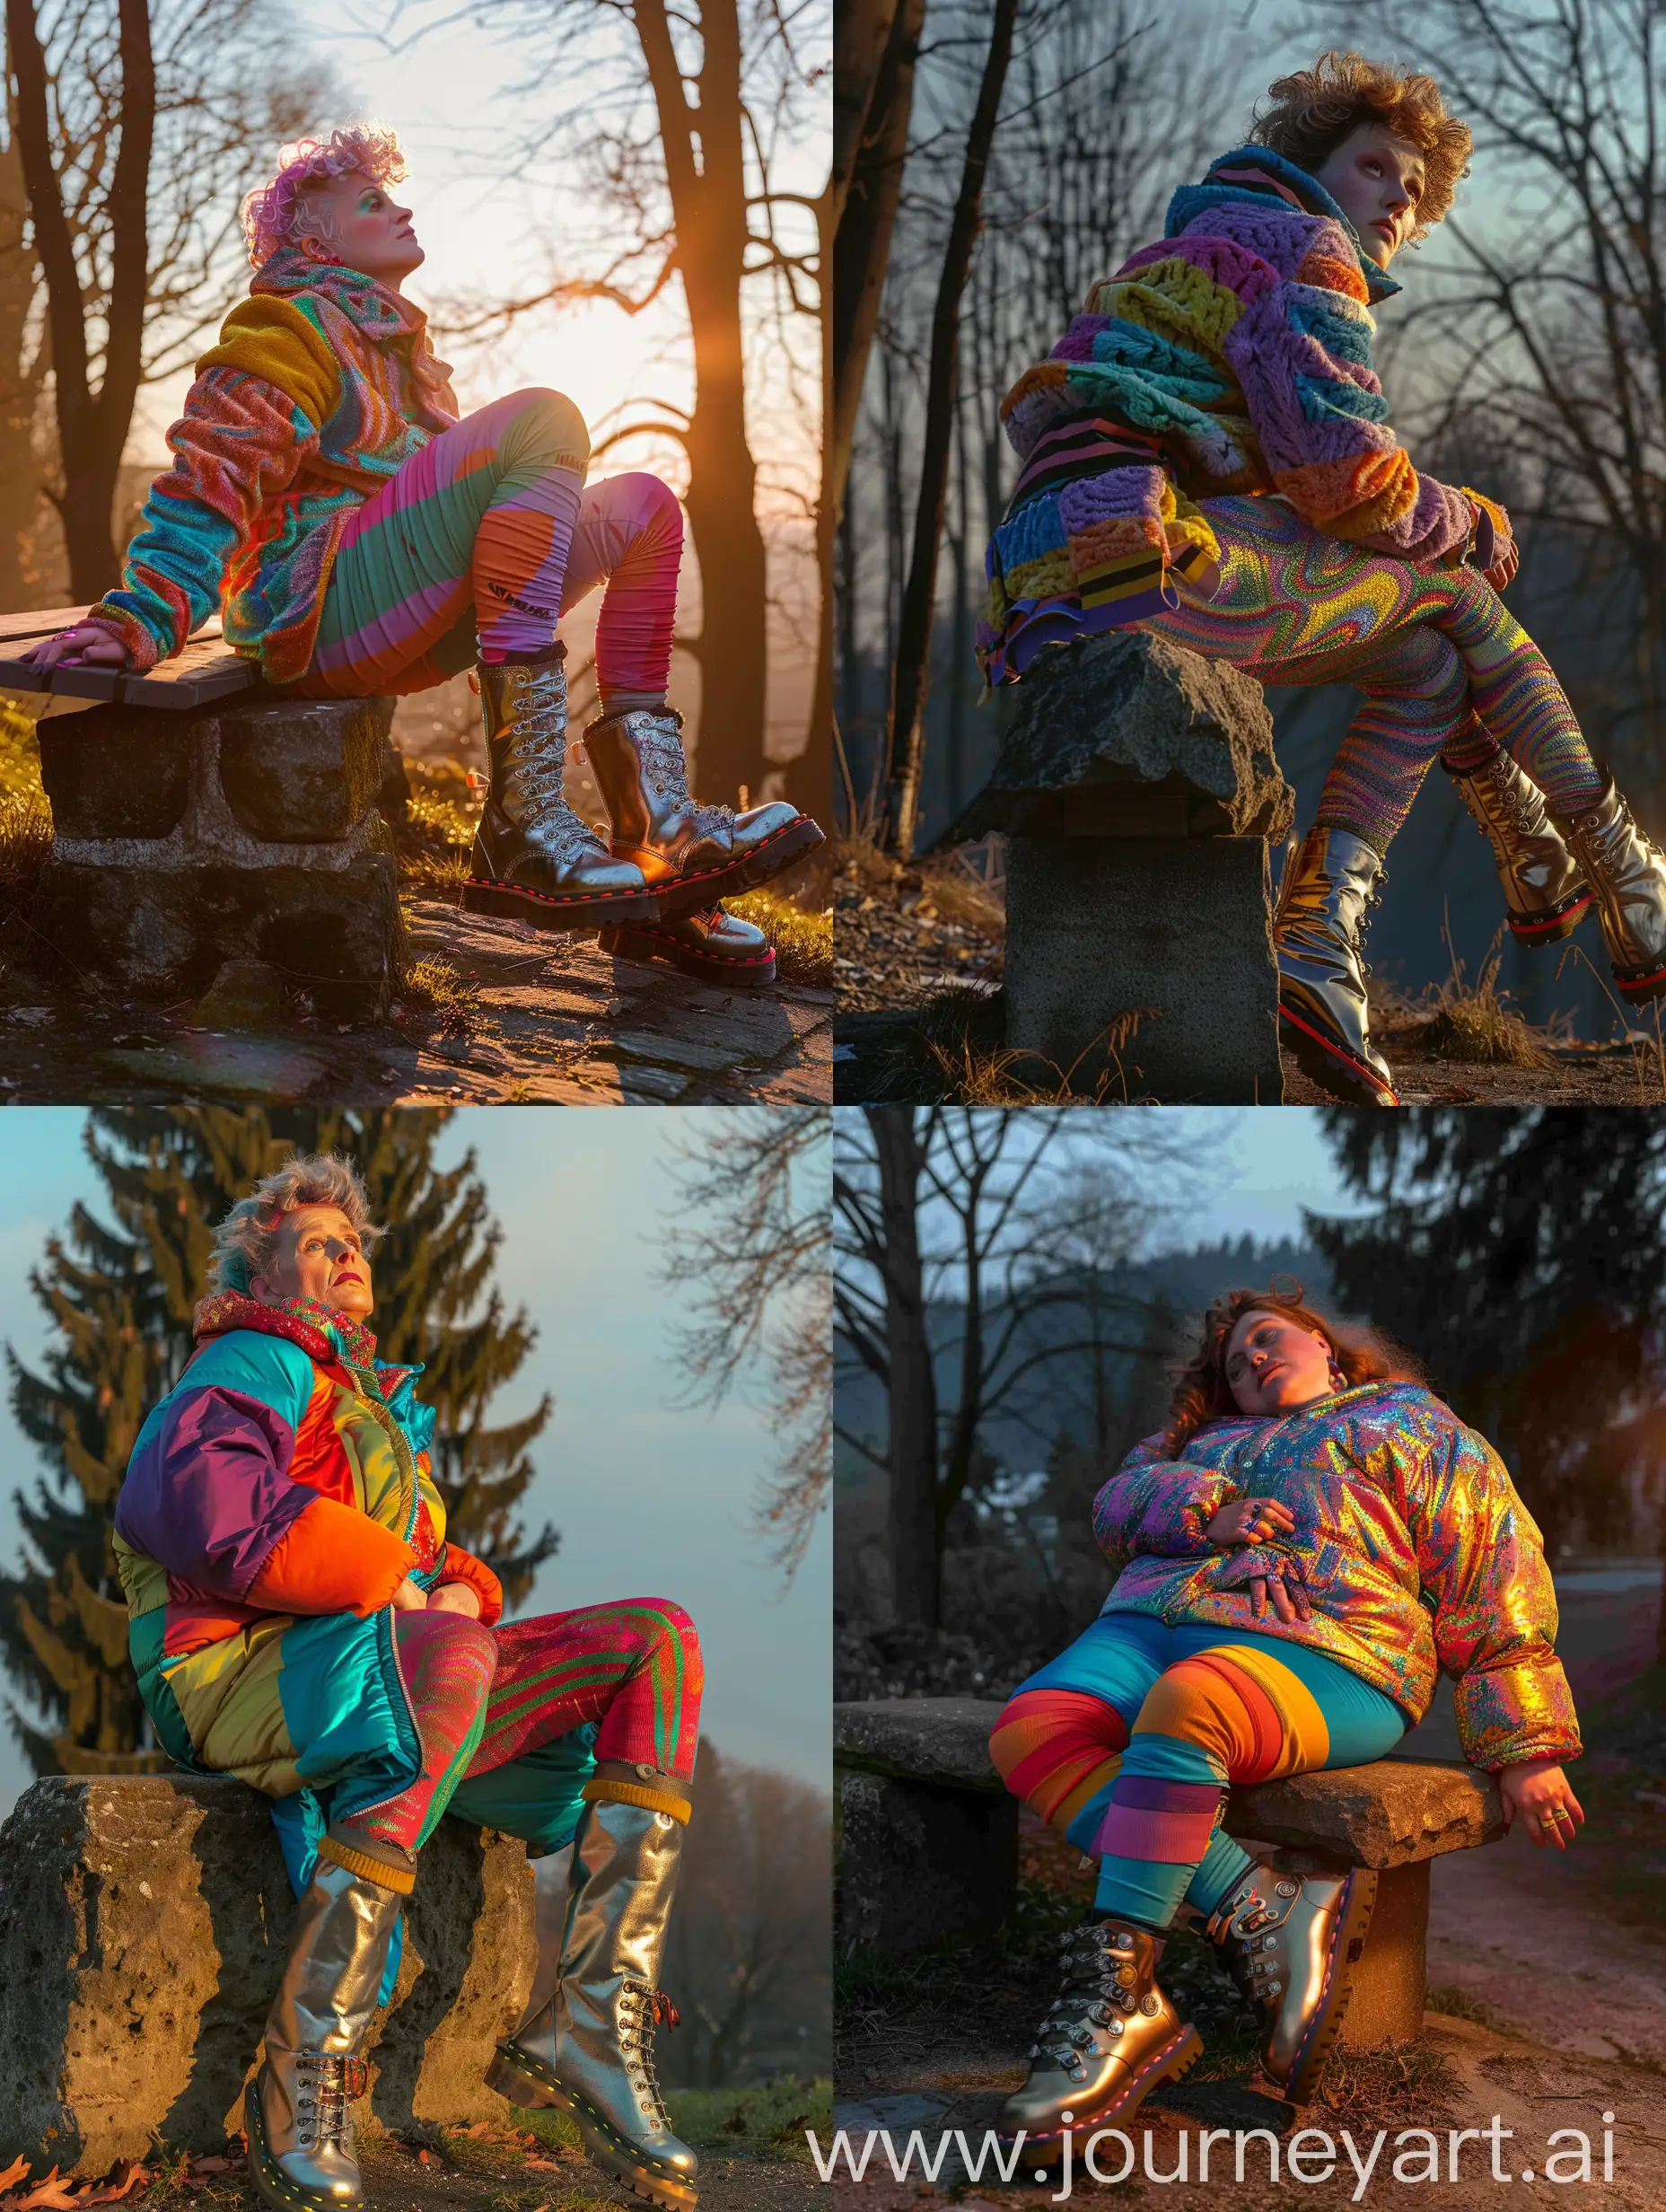 Dramatic-Winter-Fashion-Portrait-Spooky-Emo-Nerd-Housewife-in-Colorful-90s-Style